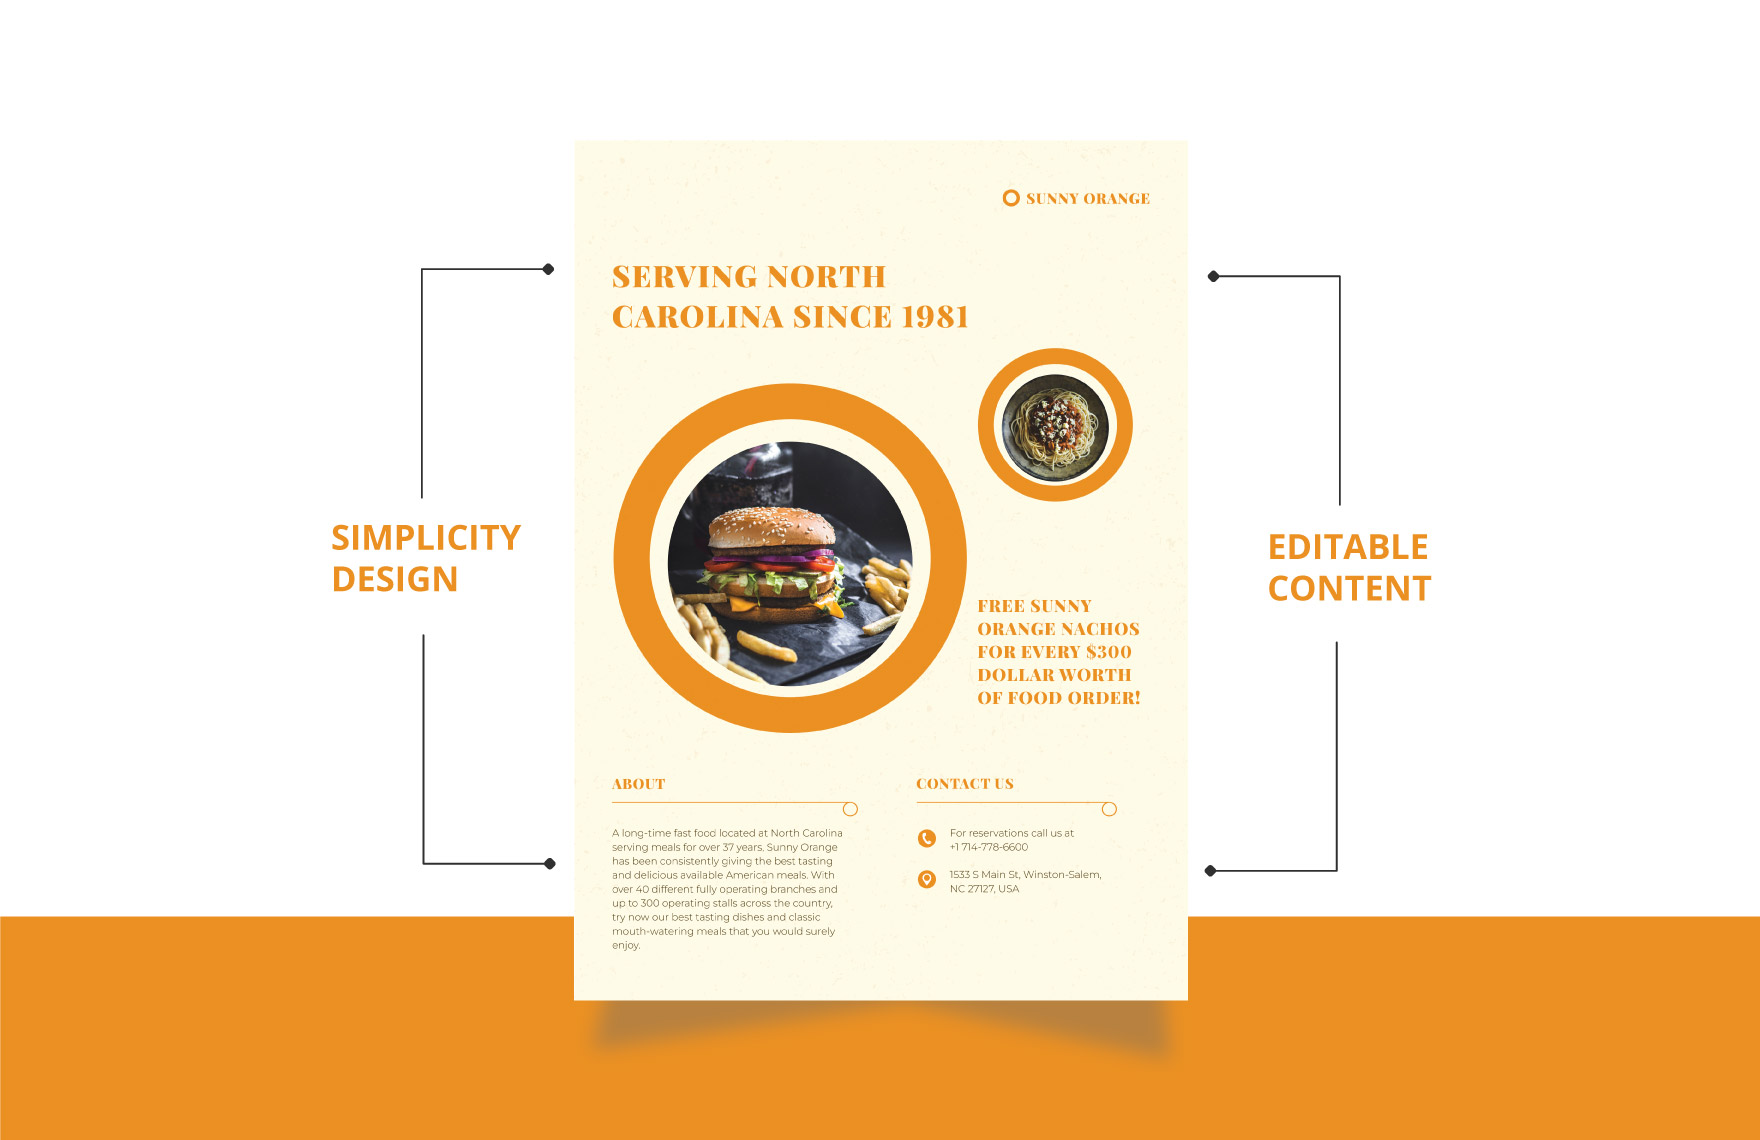 Fast Food Flyer Template